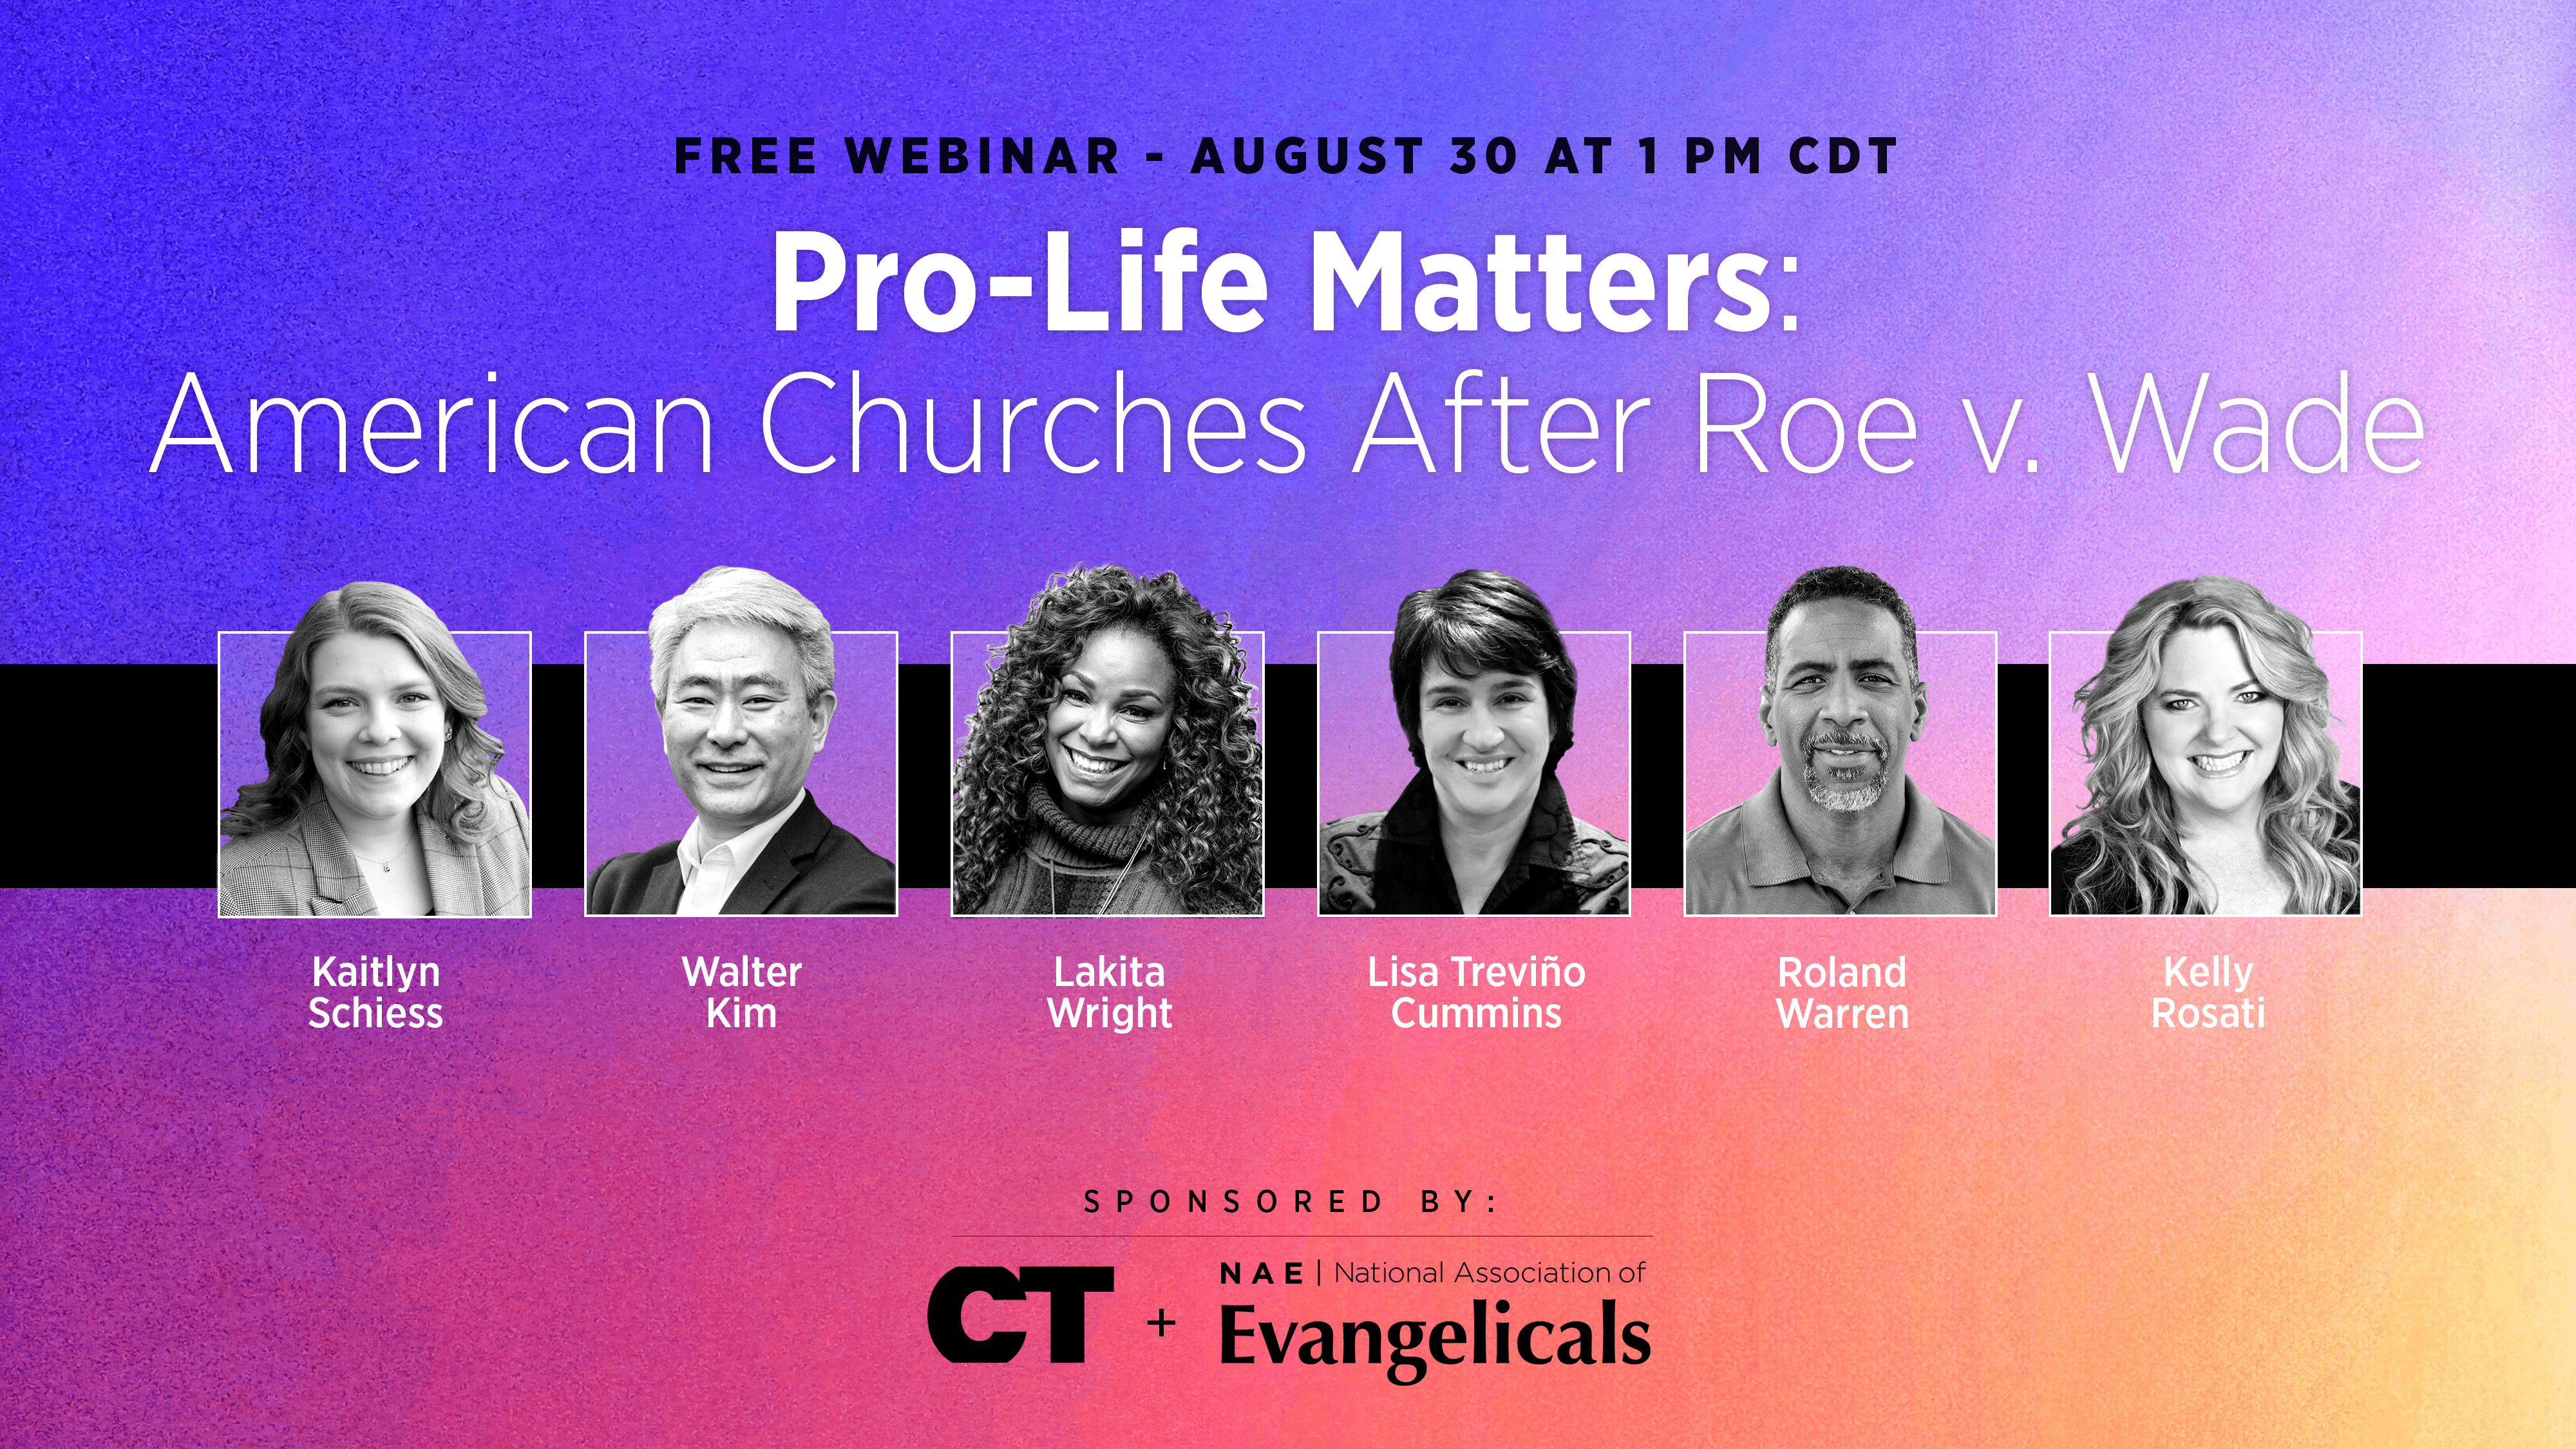 Pro-Life Ministry in Post-Roe America Christianity Today